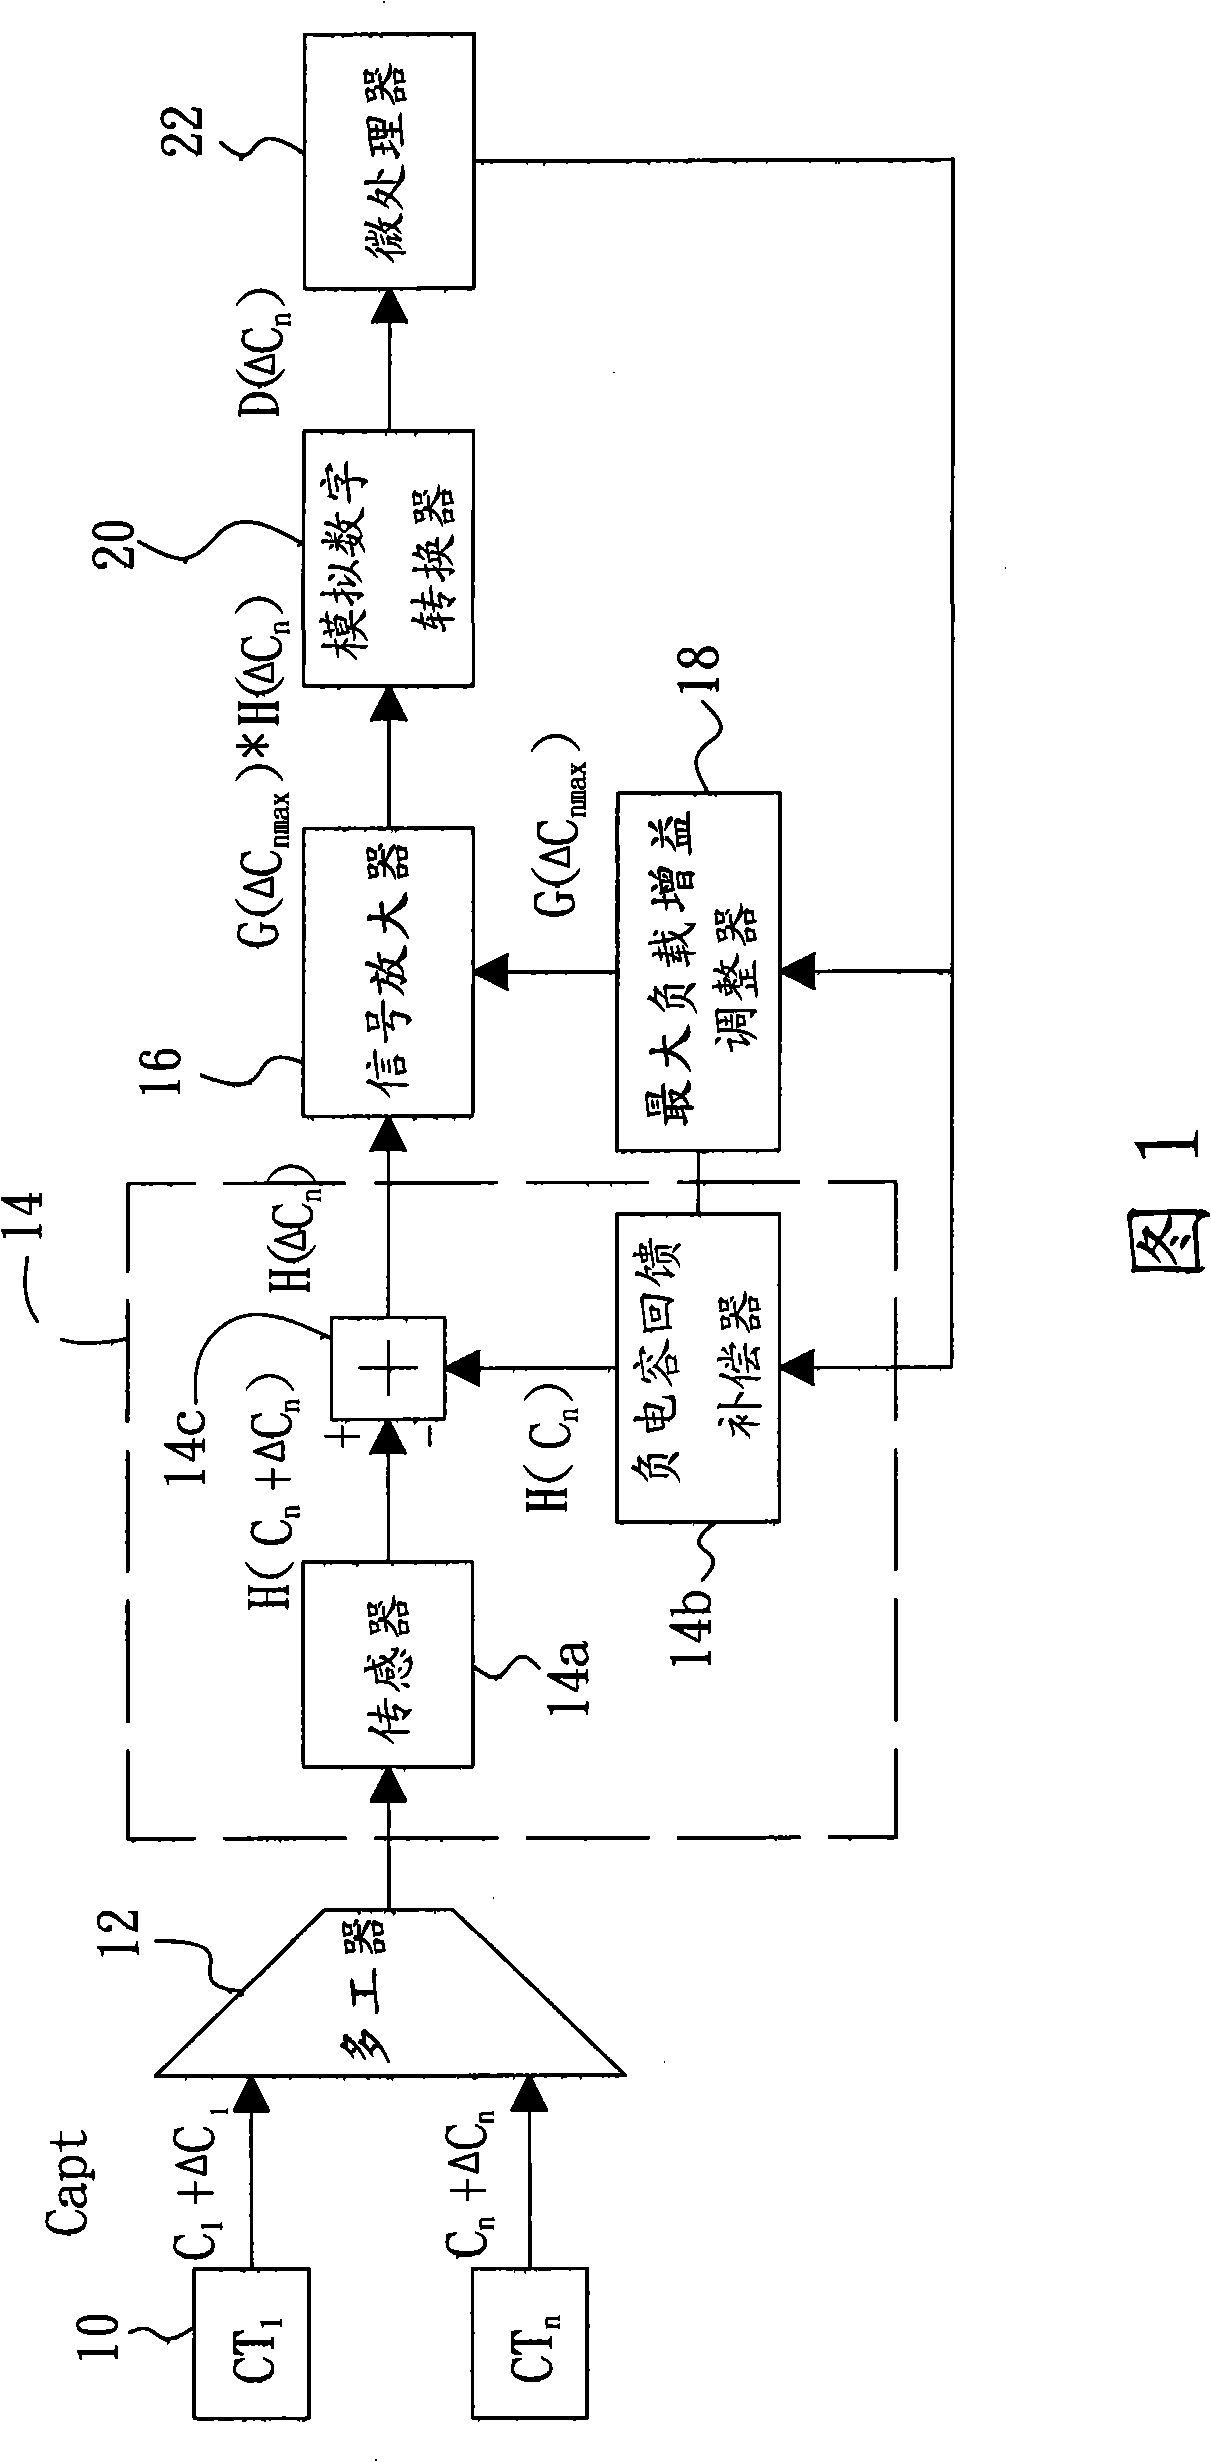 Article locating detector of capacitance touching control panel, and article locating method